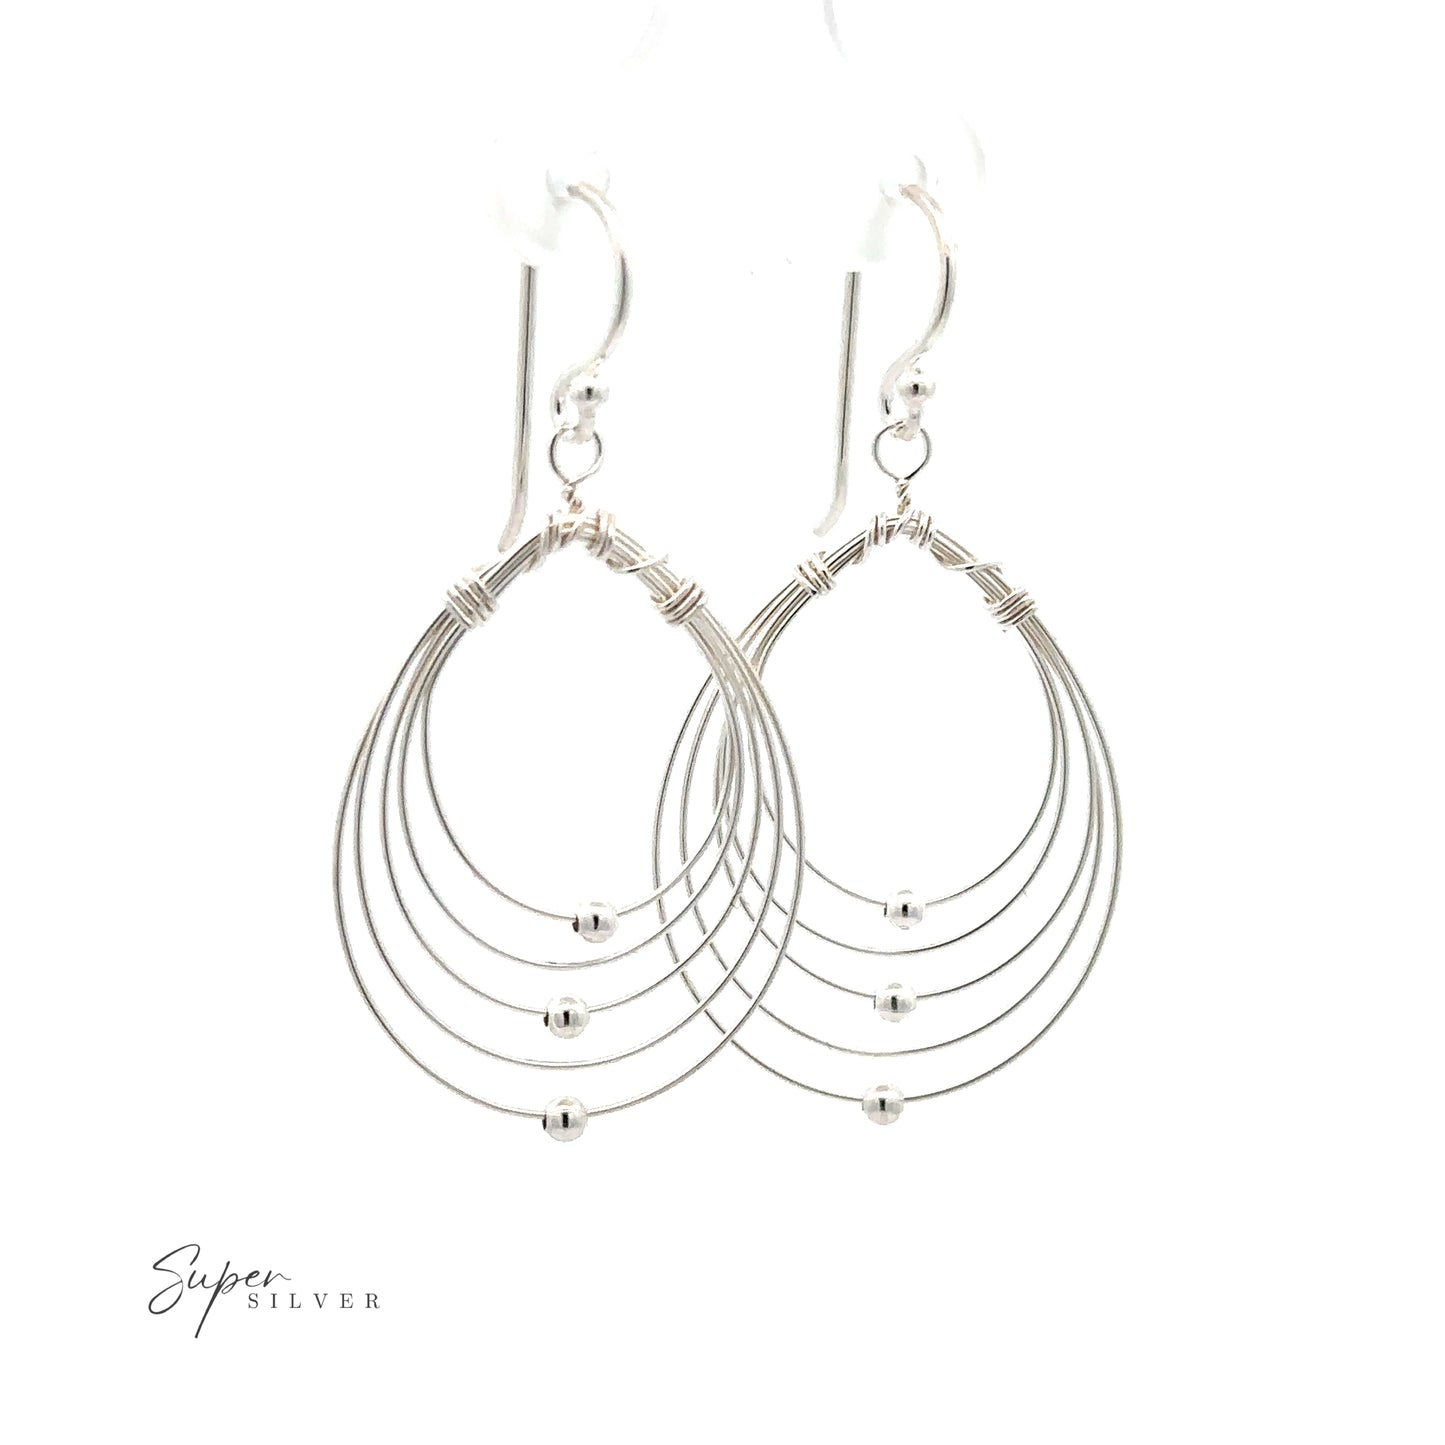 A pair of Wire Teardrop Dangle Earrings on a white background.